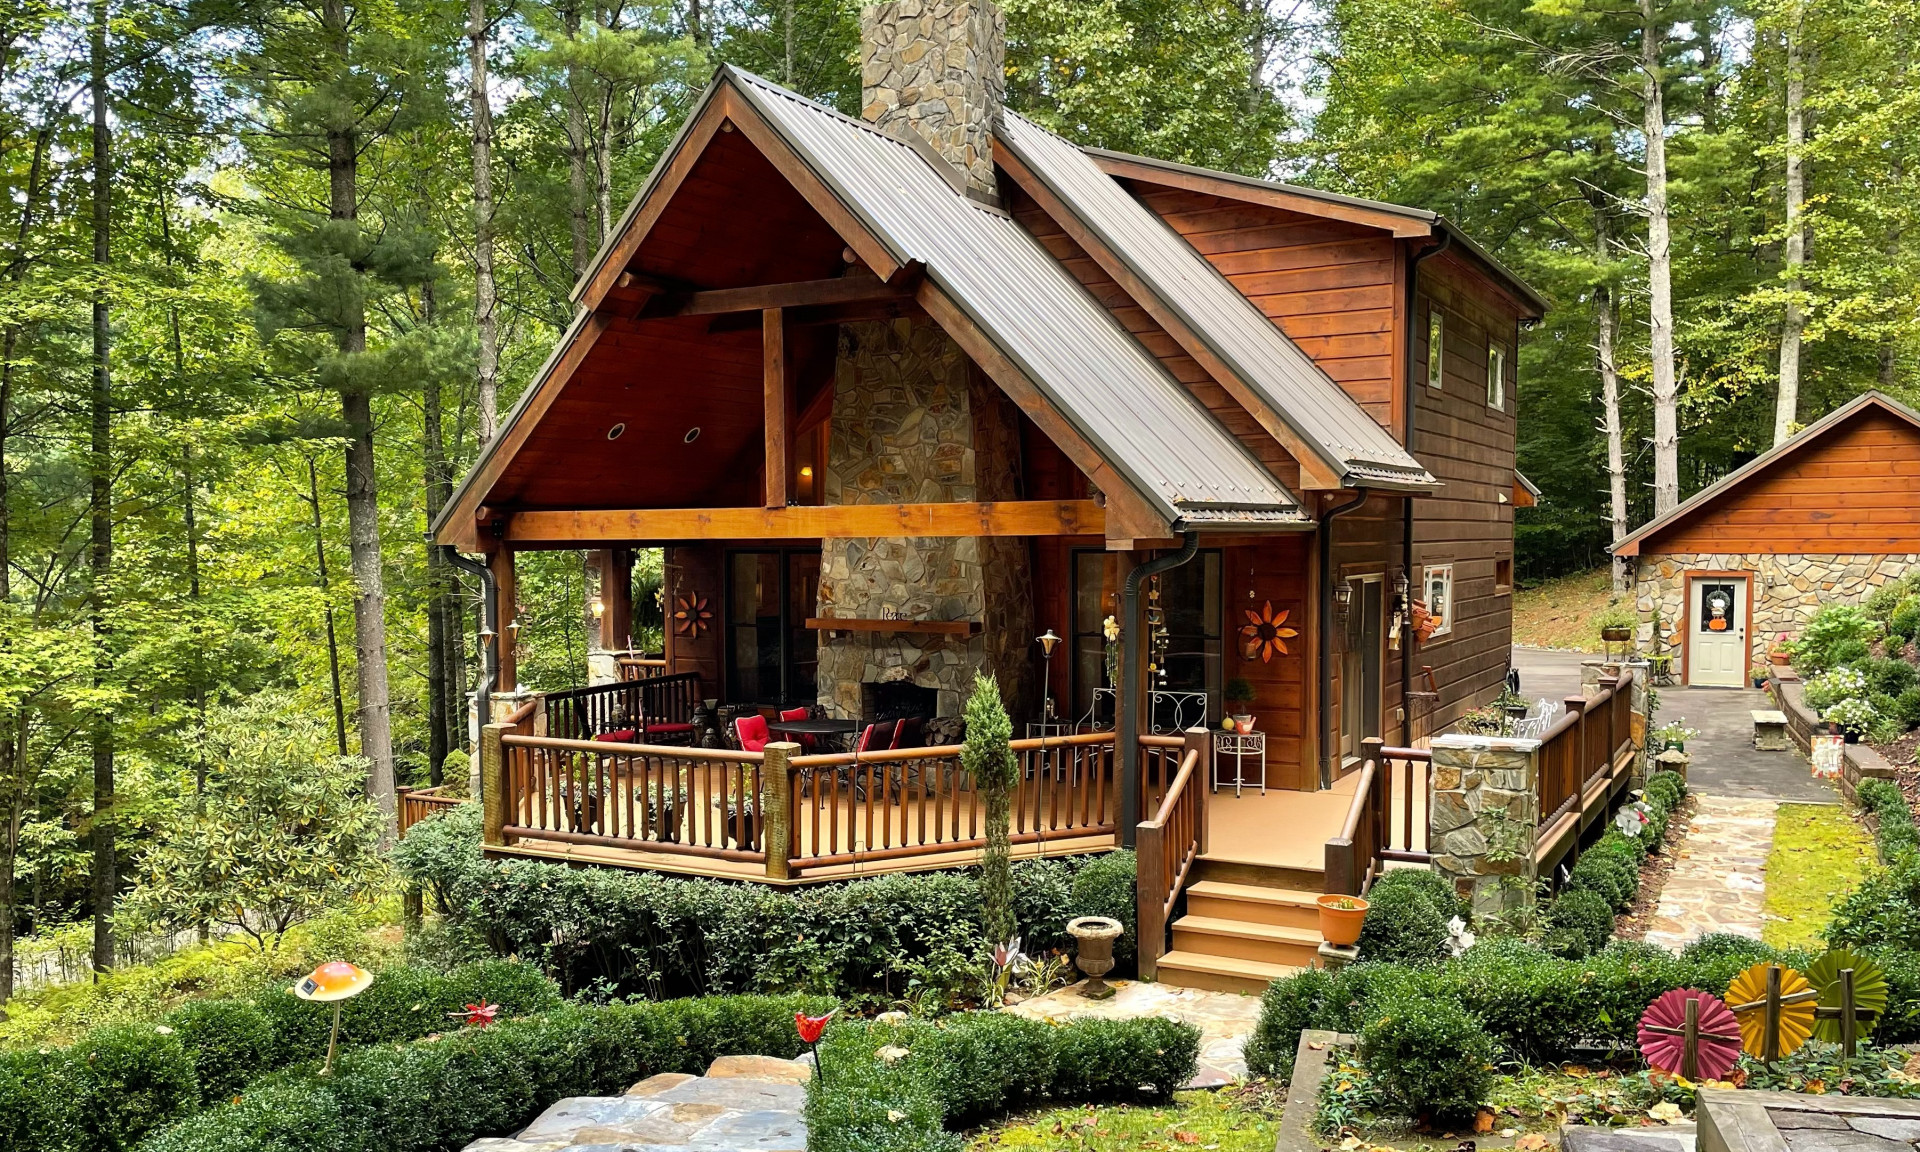 Blue Ridge Mountain Log Cabin tucked in the woods with huge covered deck with outdoor fireplace!